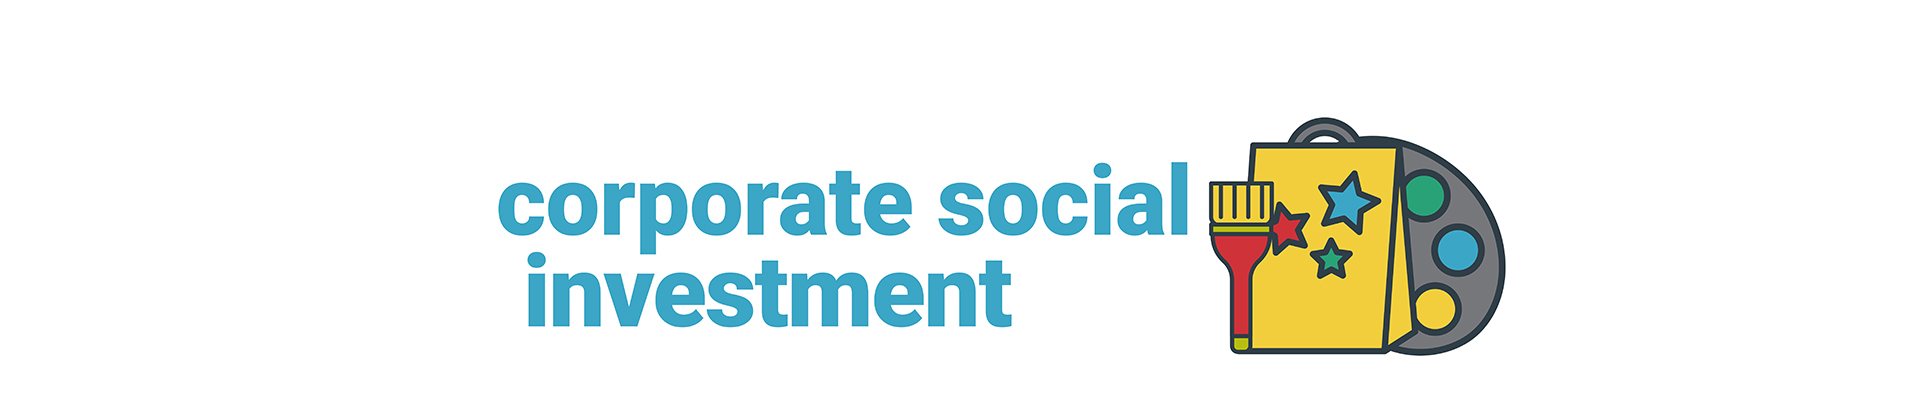 Corporate Social Investment